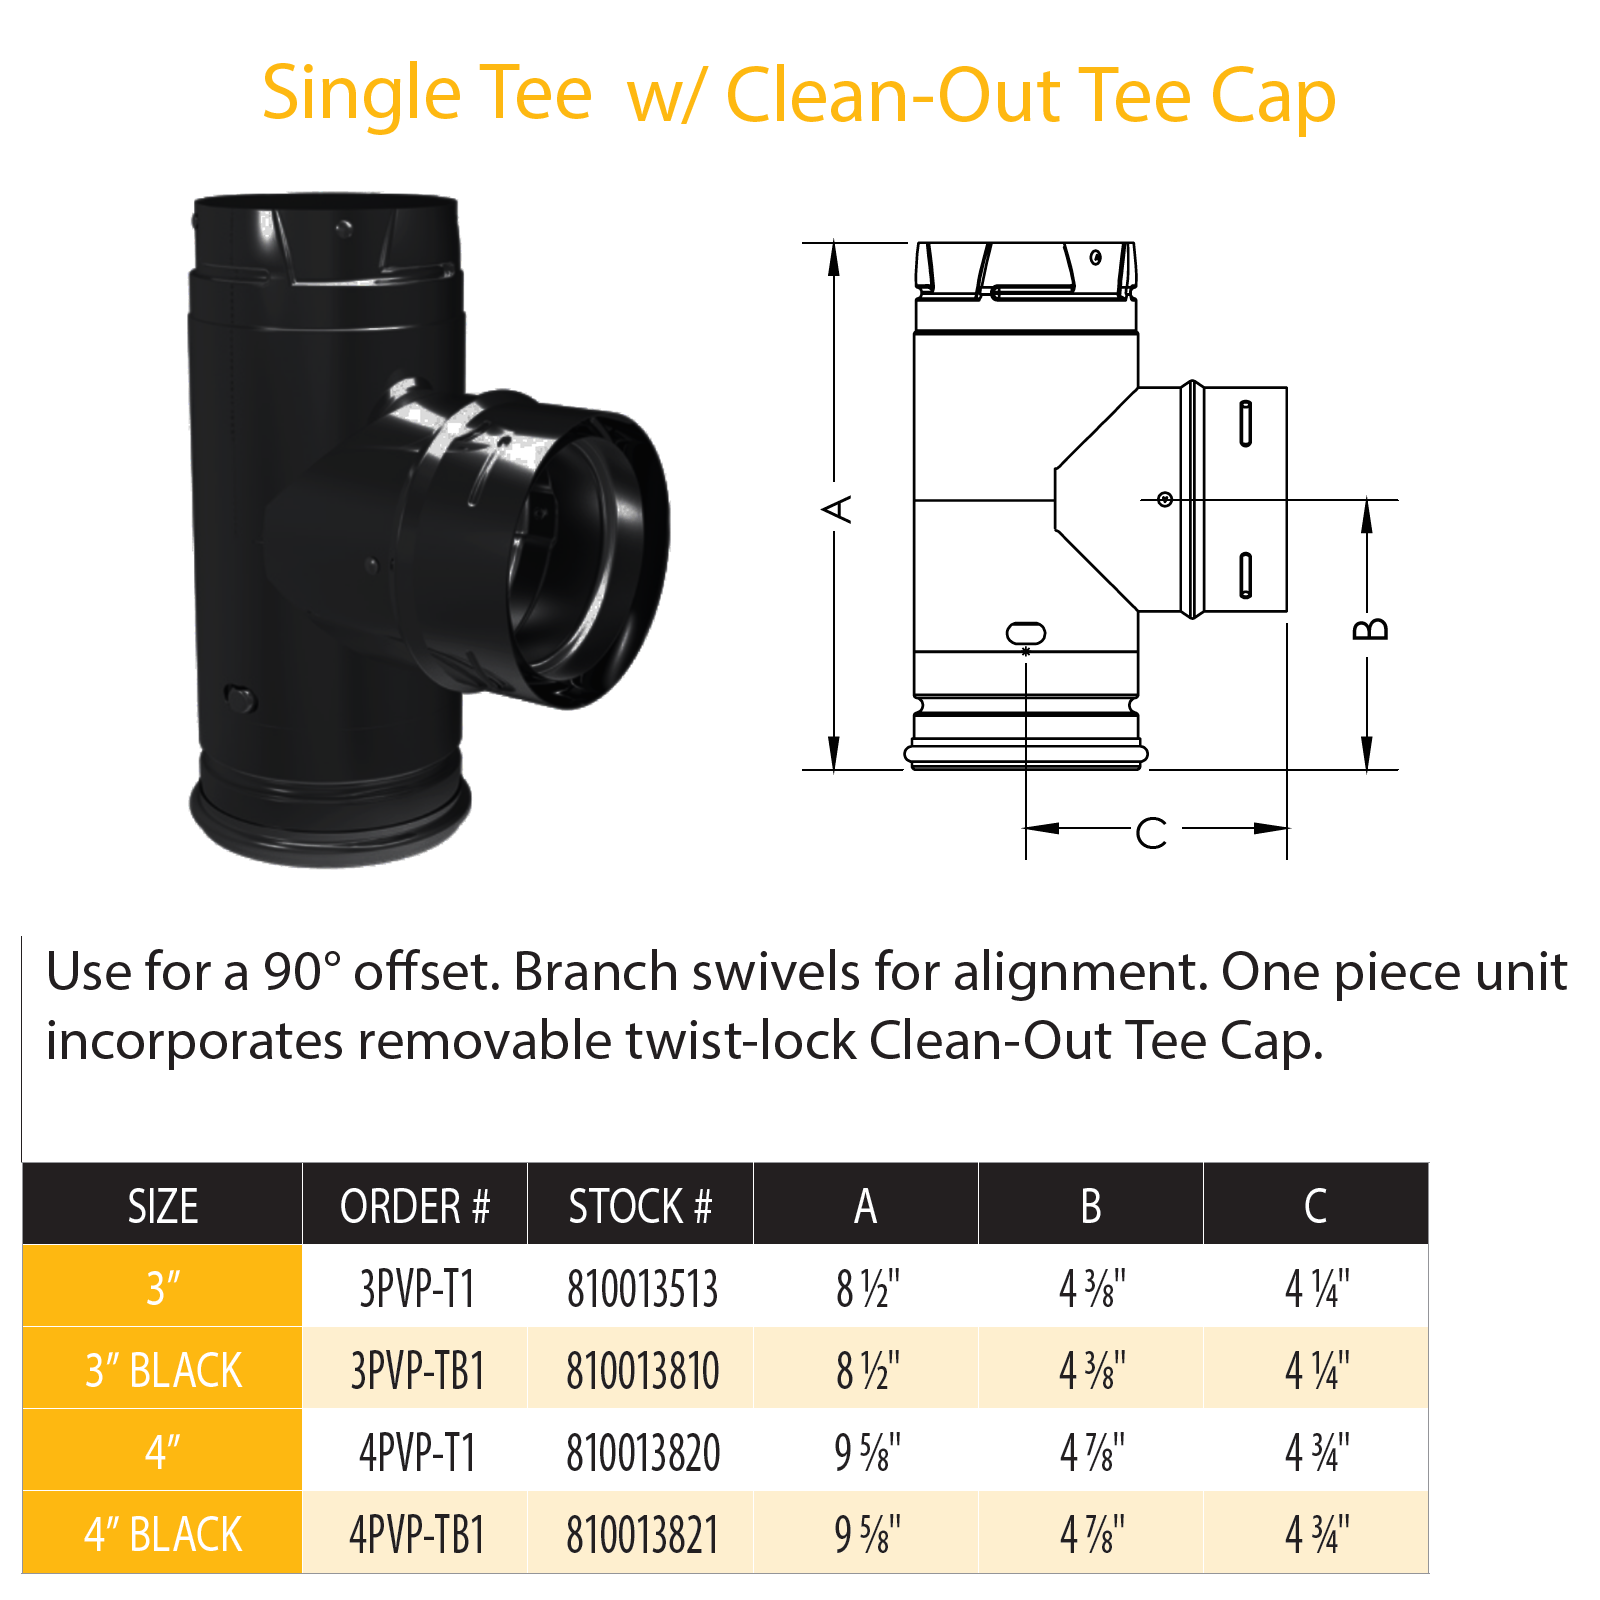 DuraVent PVP Single Tee w/Clean-Out Tee Cap (black) | 3PVP-TB1